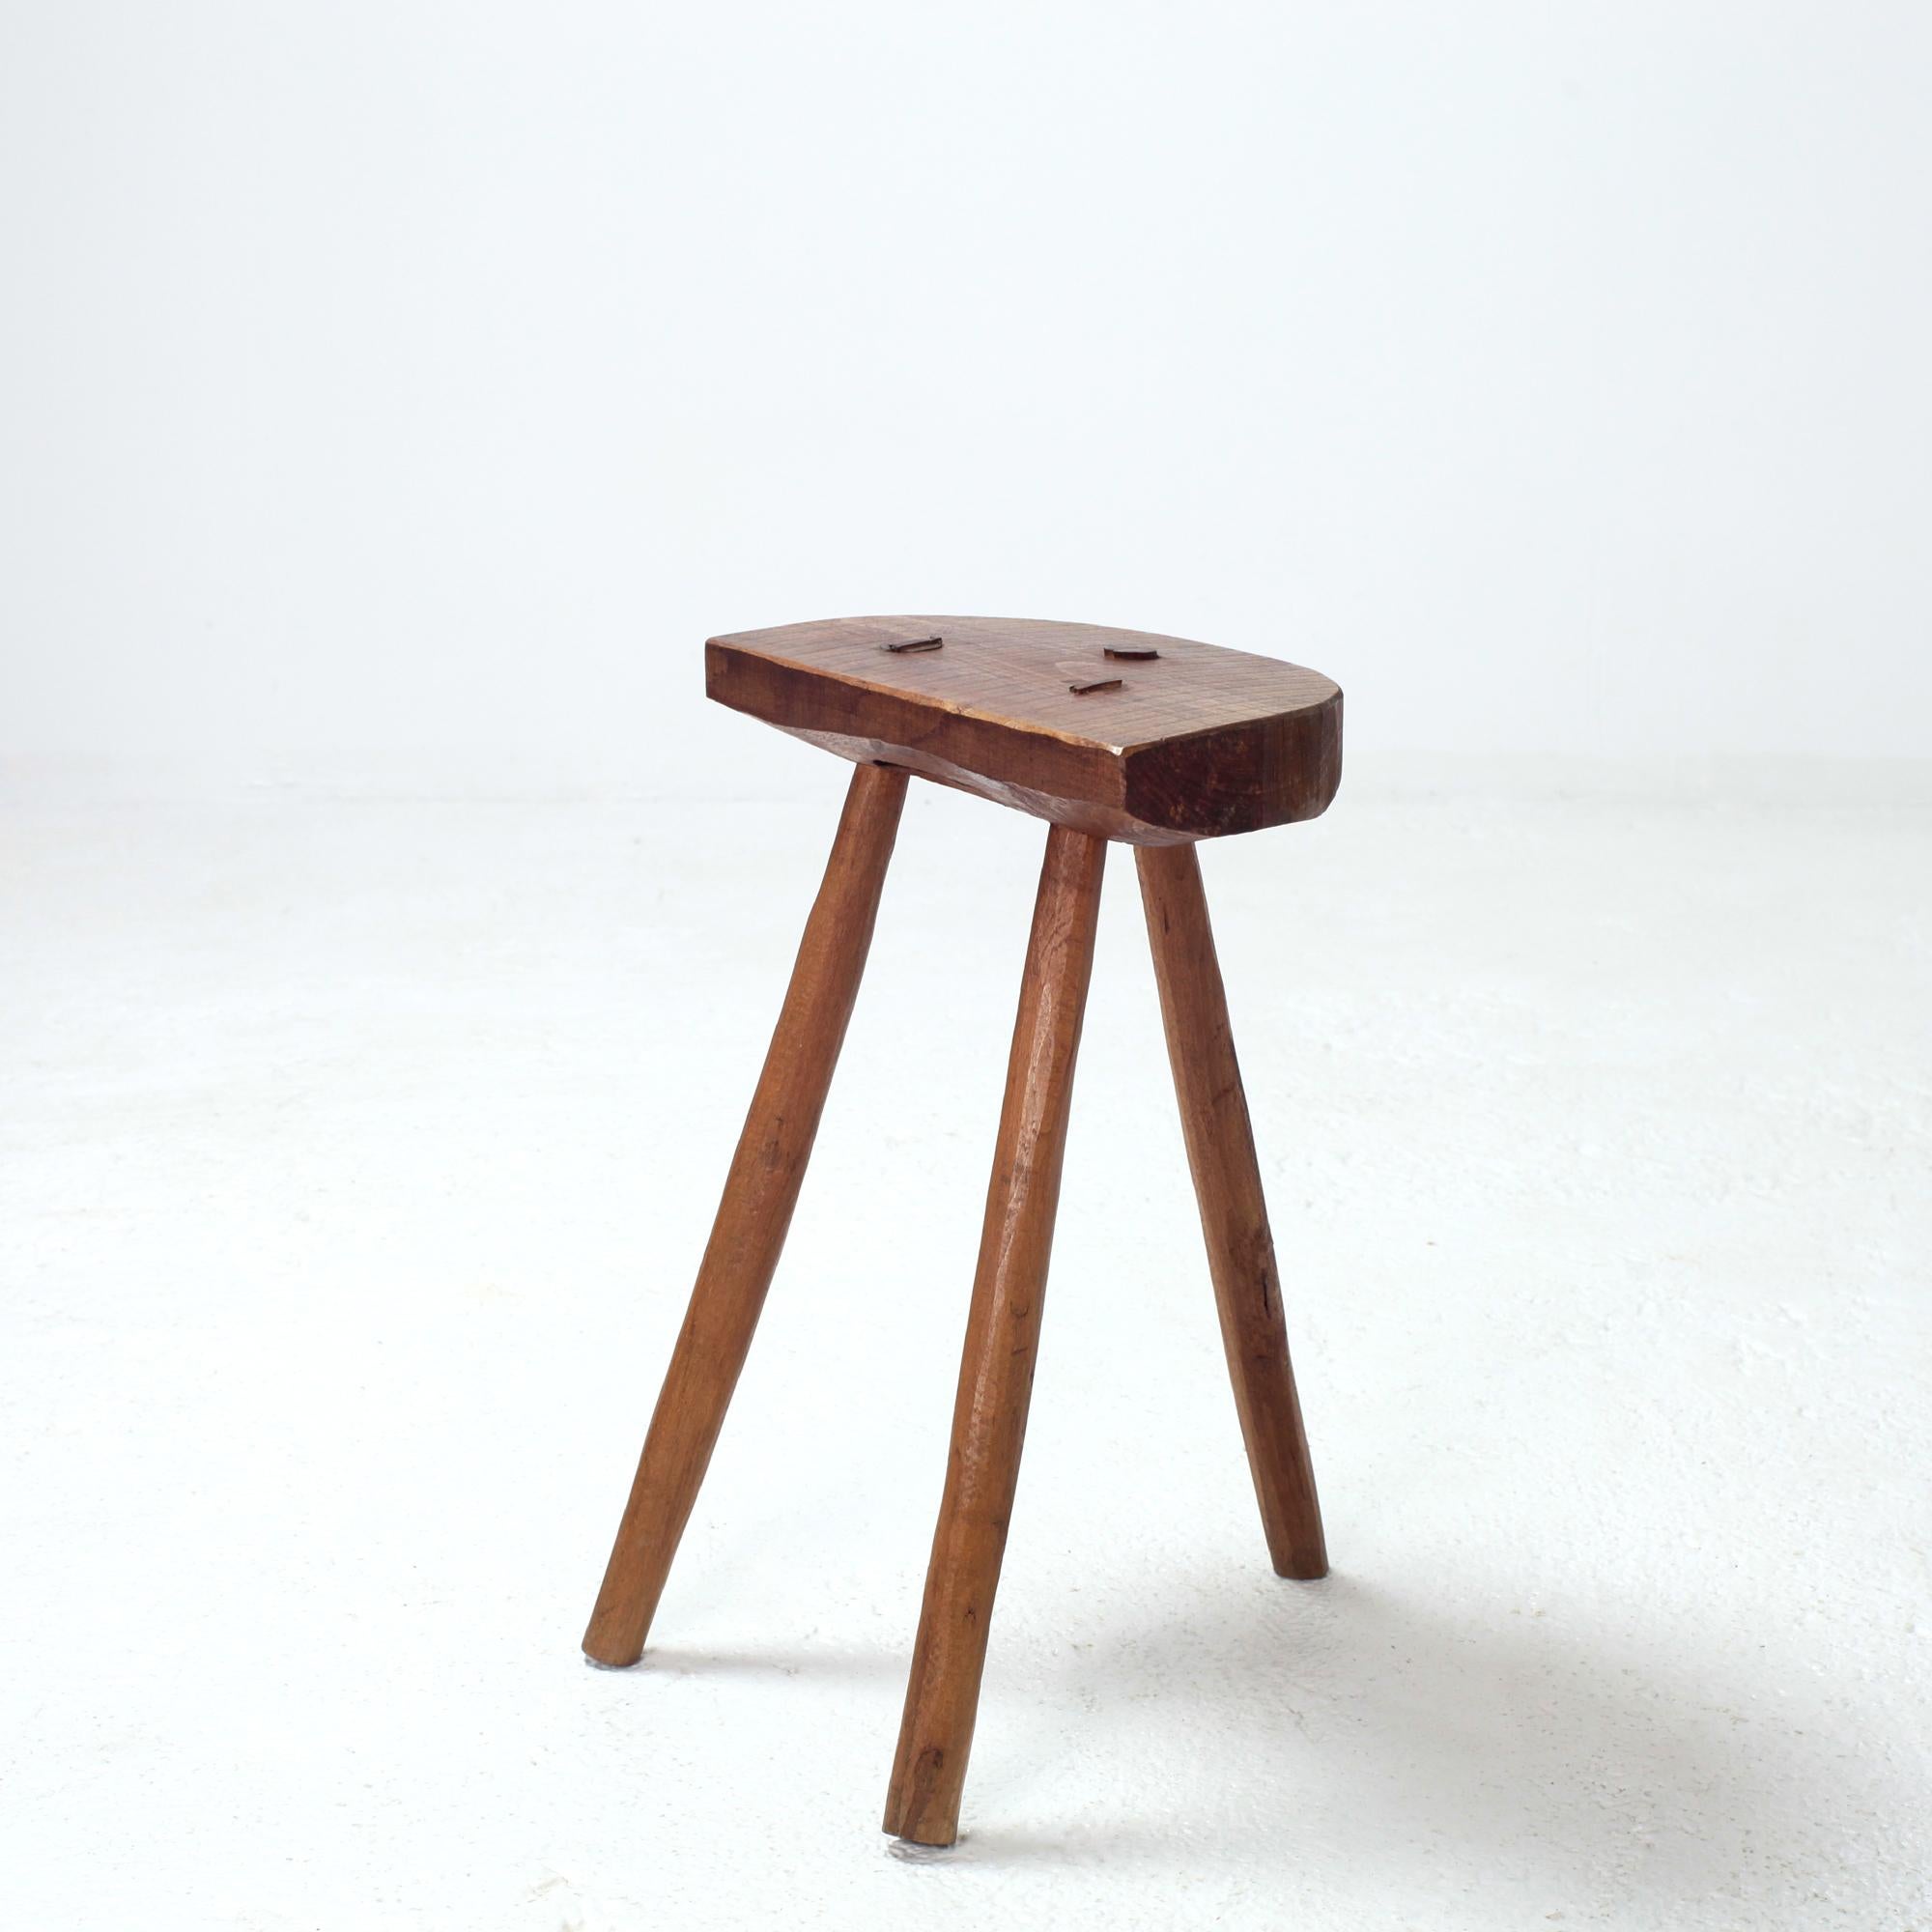 Handcrafted french brutalist solid wood tripod stool or side table
France 1960s
No nails or hardware
In the style of Jean Touret, Charlotte Perriand, Francis Jourdain